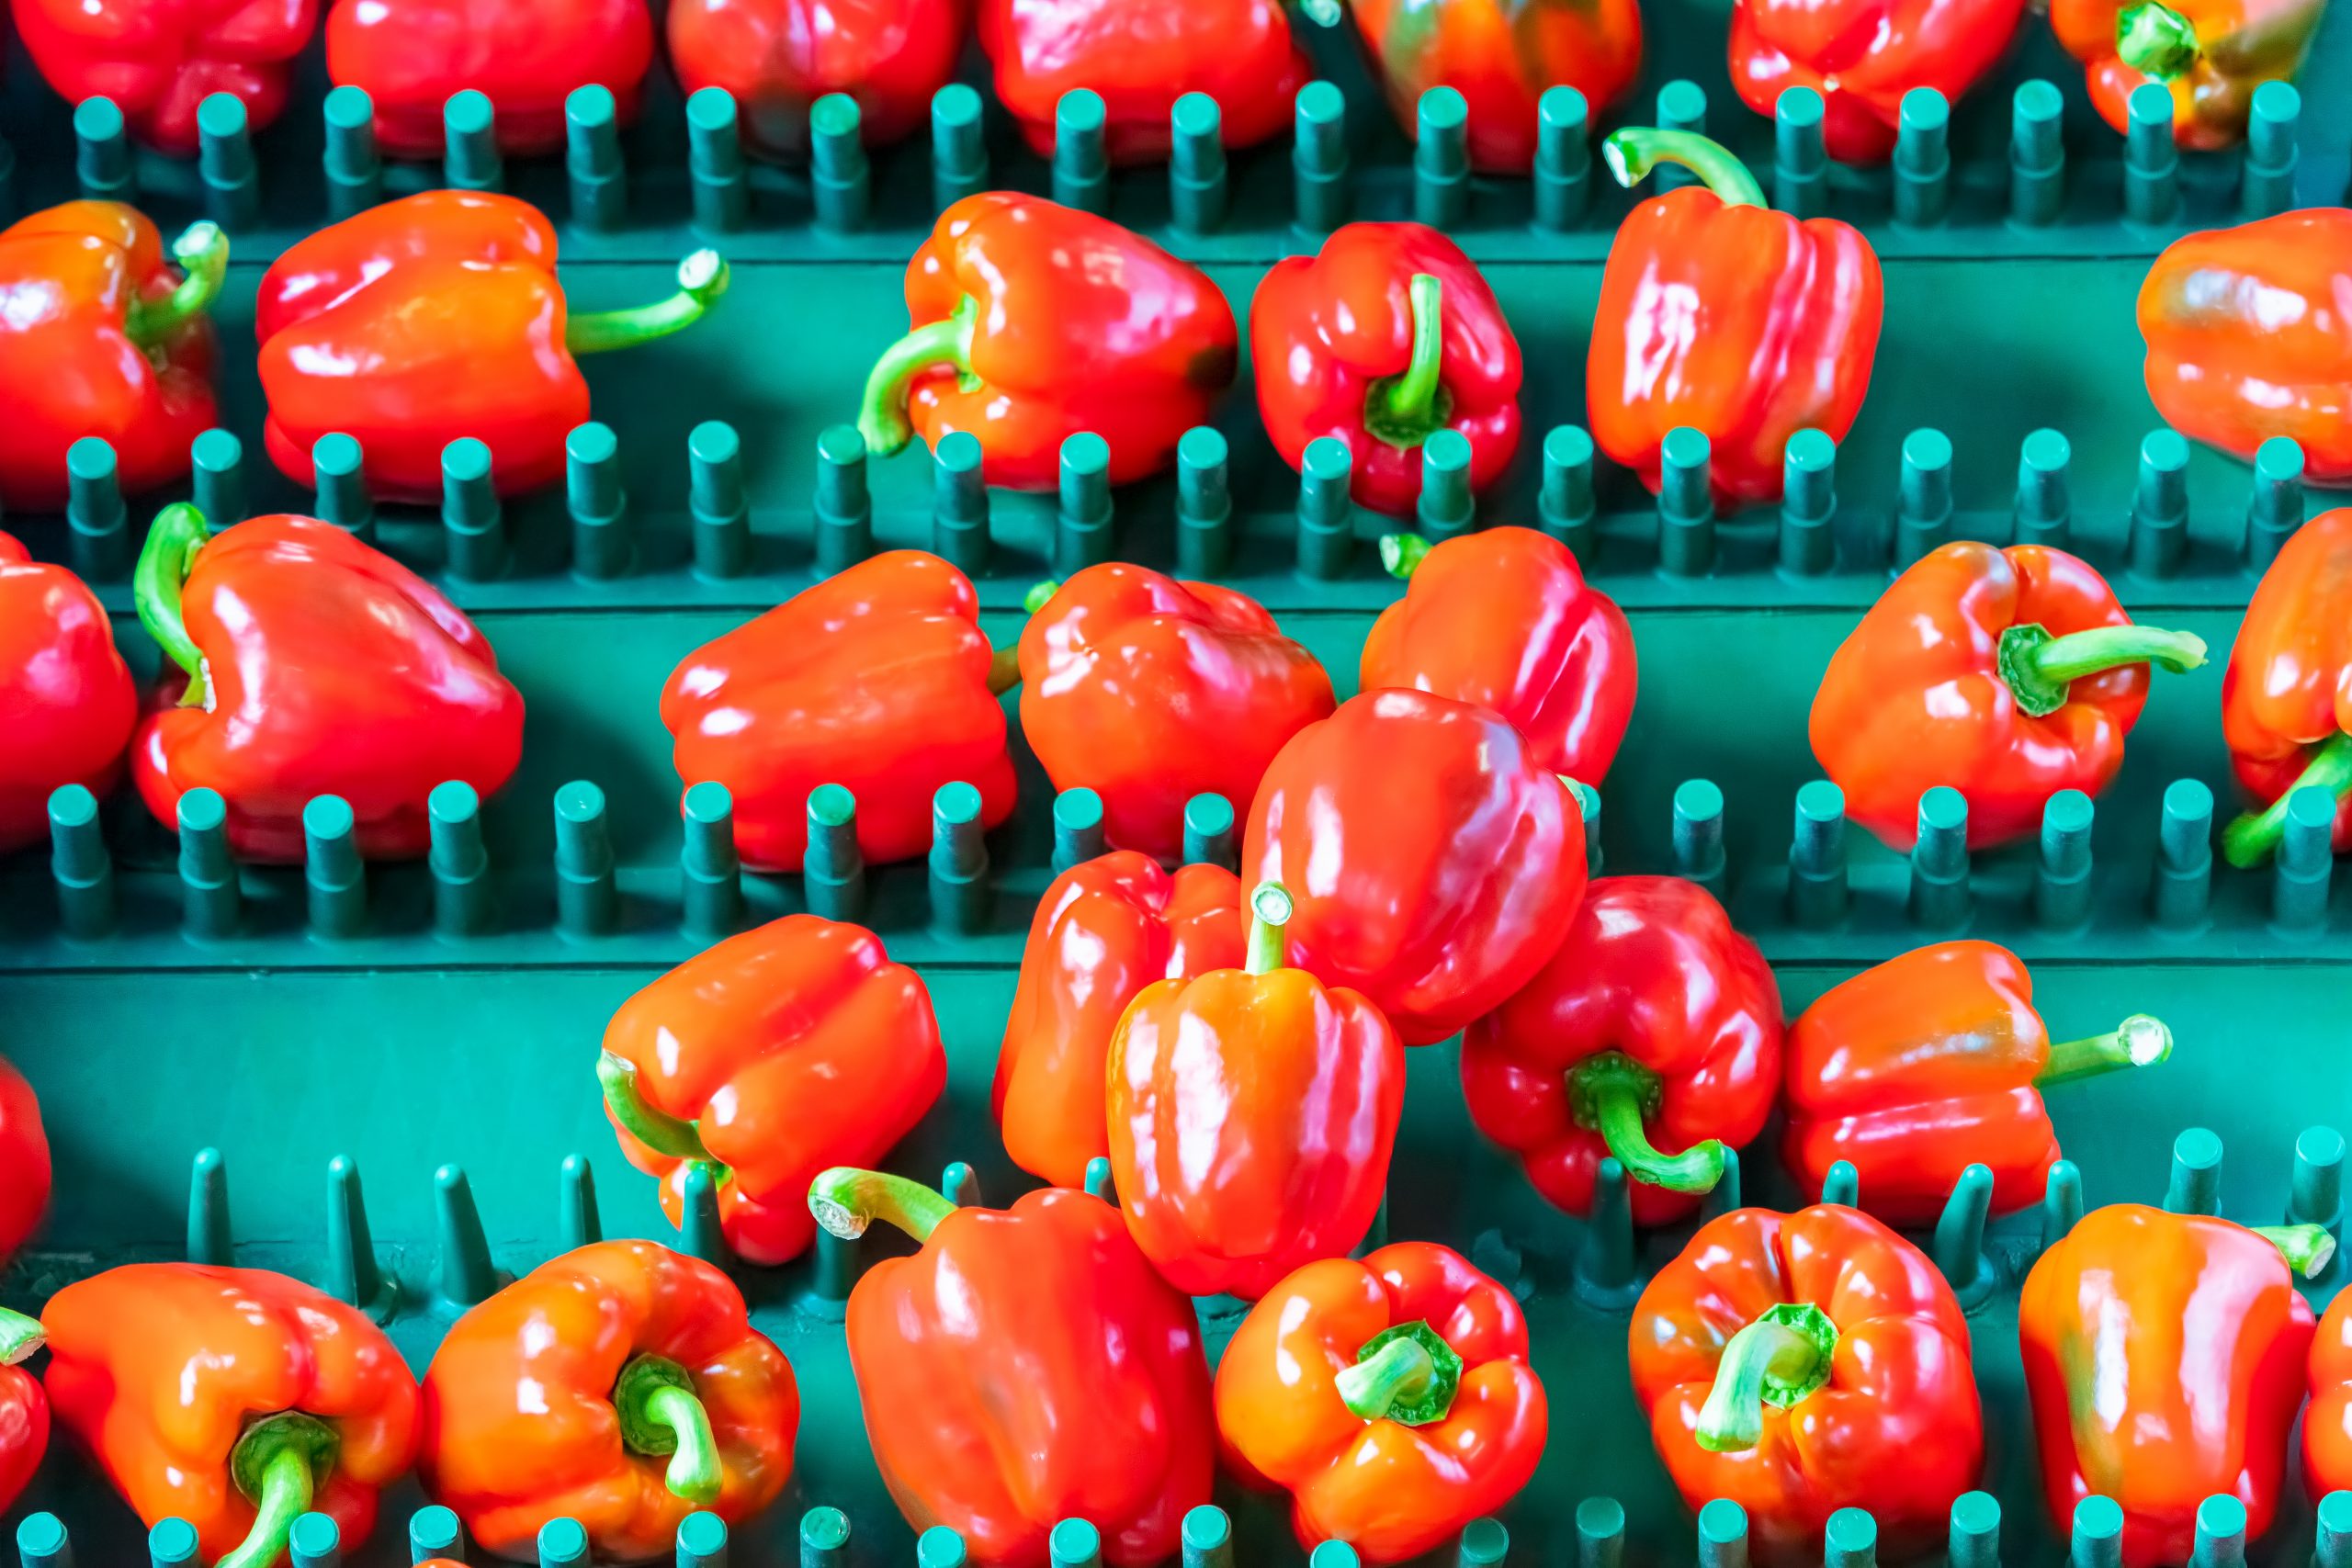 Sorting,Of,Red,Bell,Peppers,On,A,Conveyor,Belt,During